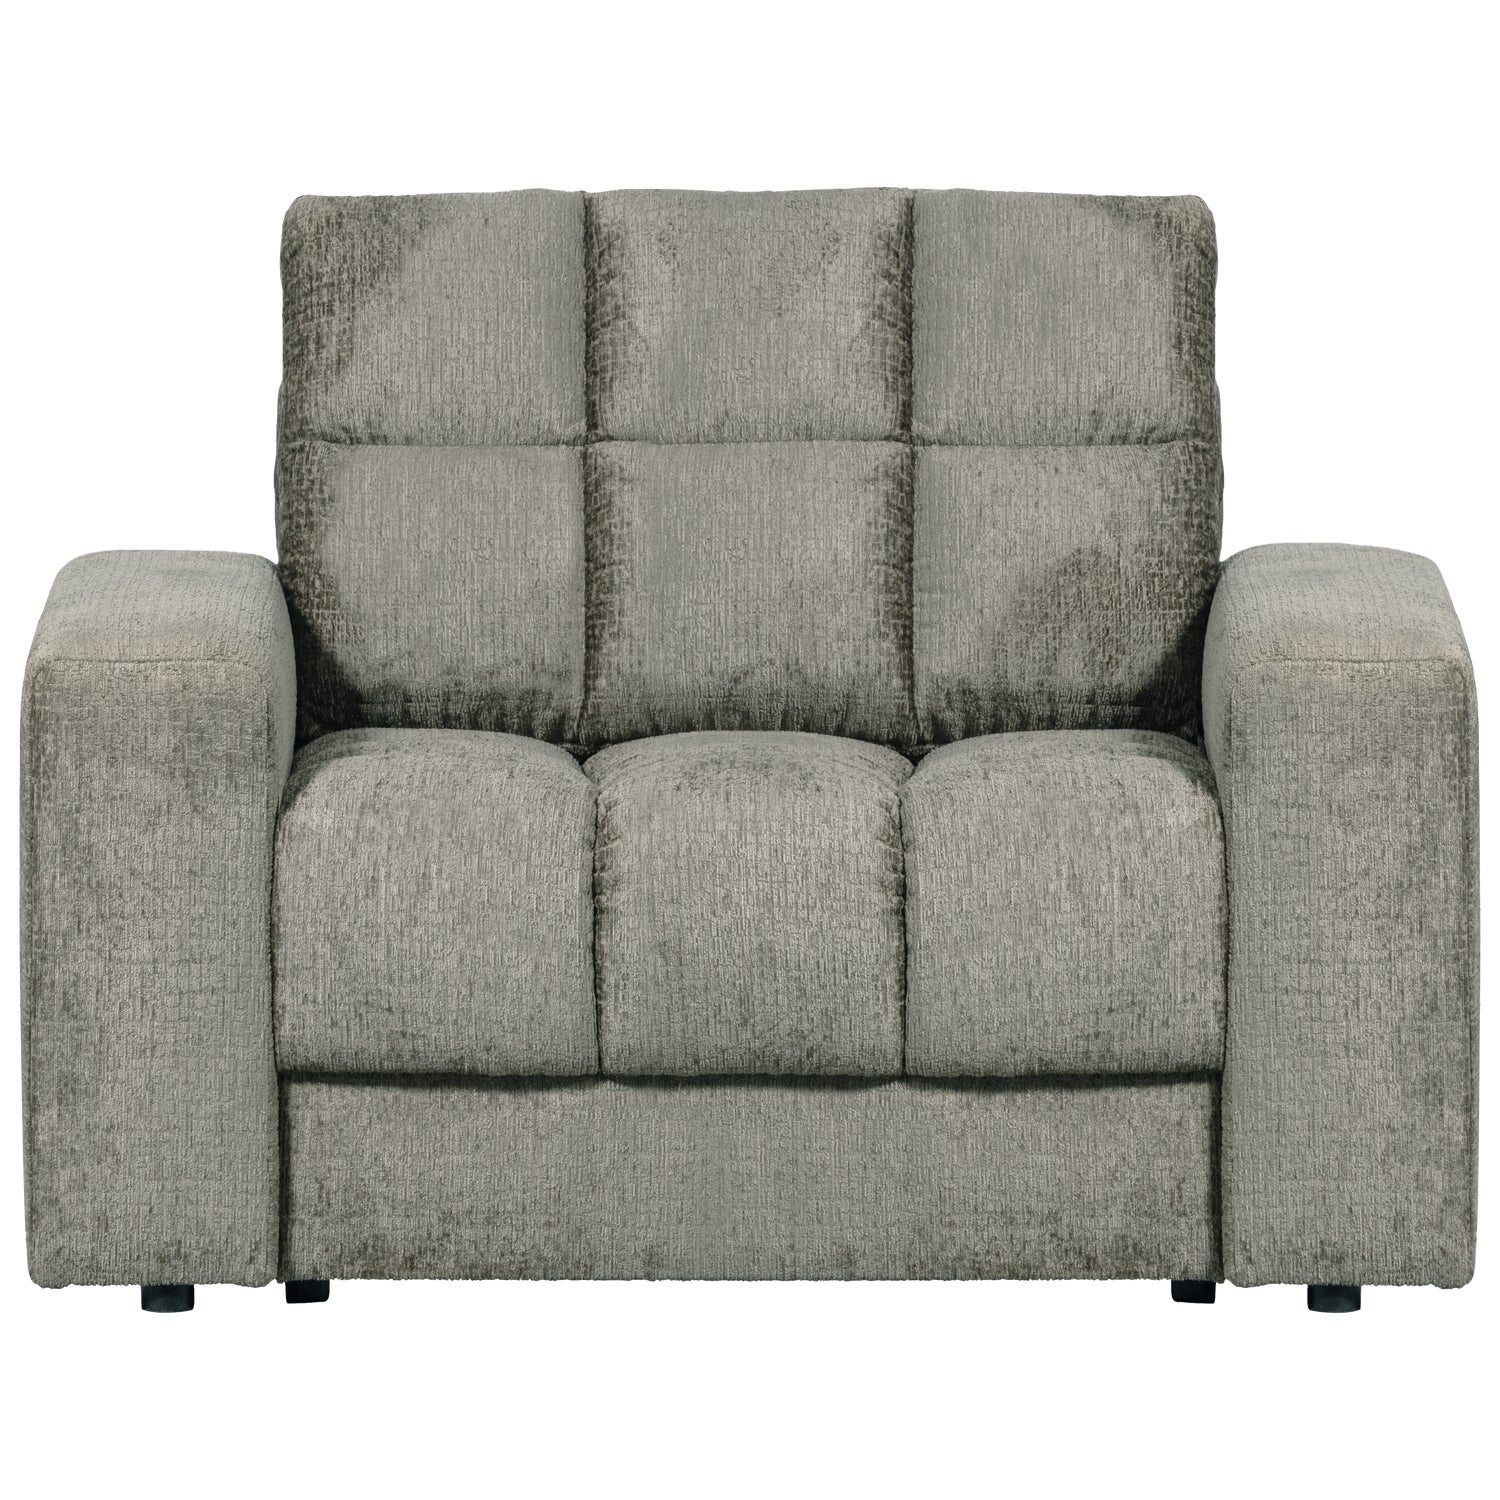 379003-FR-01_VS_WE_Second_date_fauteuil_structure_velvet_frost.png?auto=webp&format=png&width=1500&height=1500